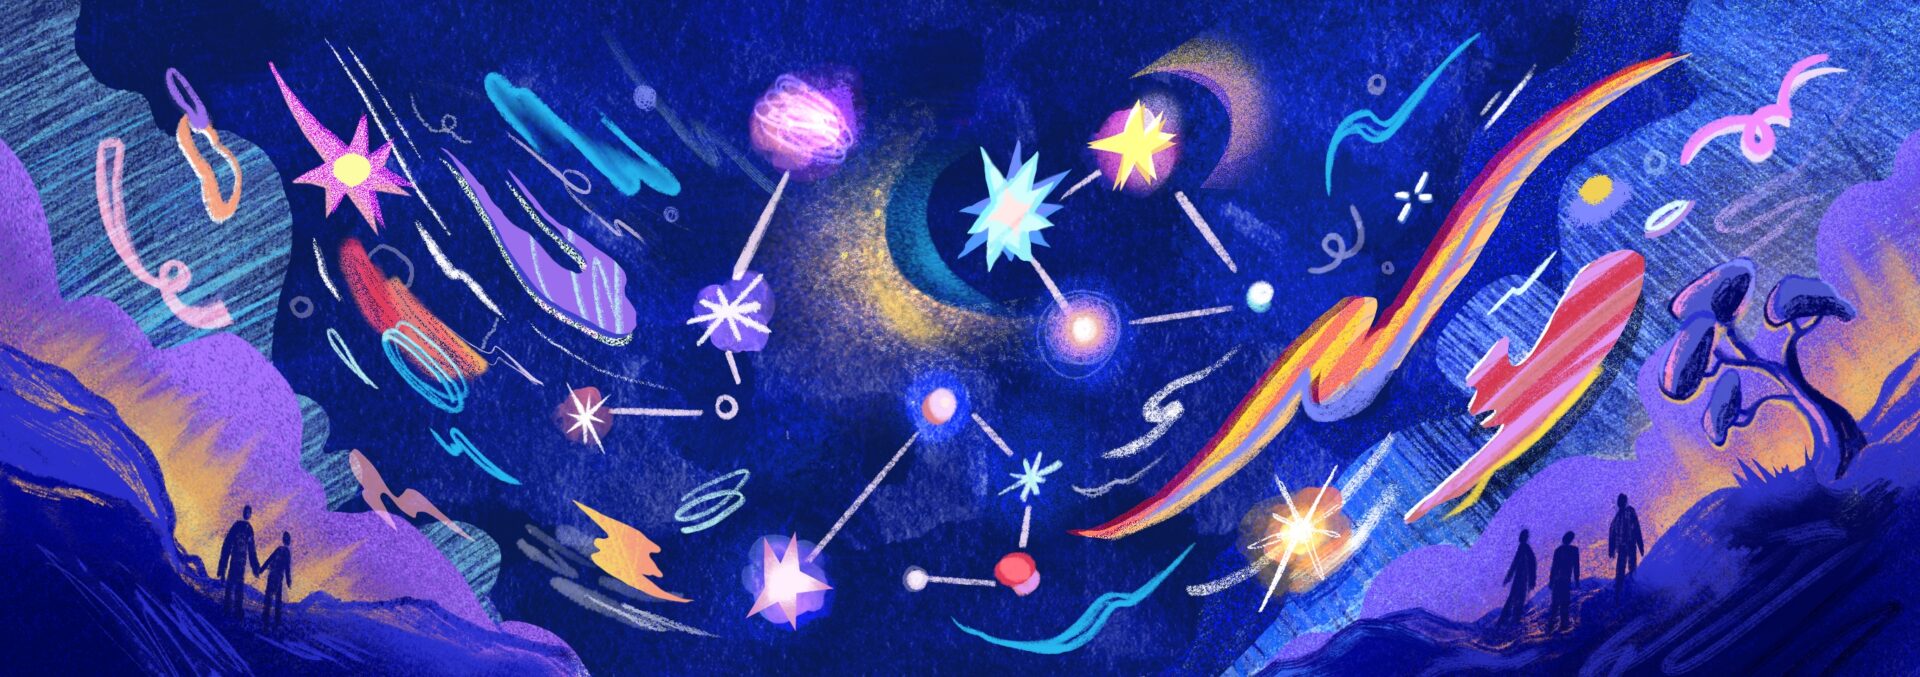 An illustration showing people stargazing. A dark blue sky is filled with stars, constellations and swirls.